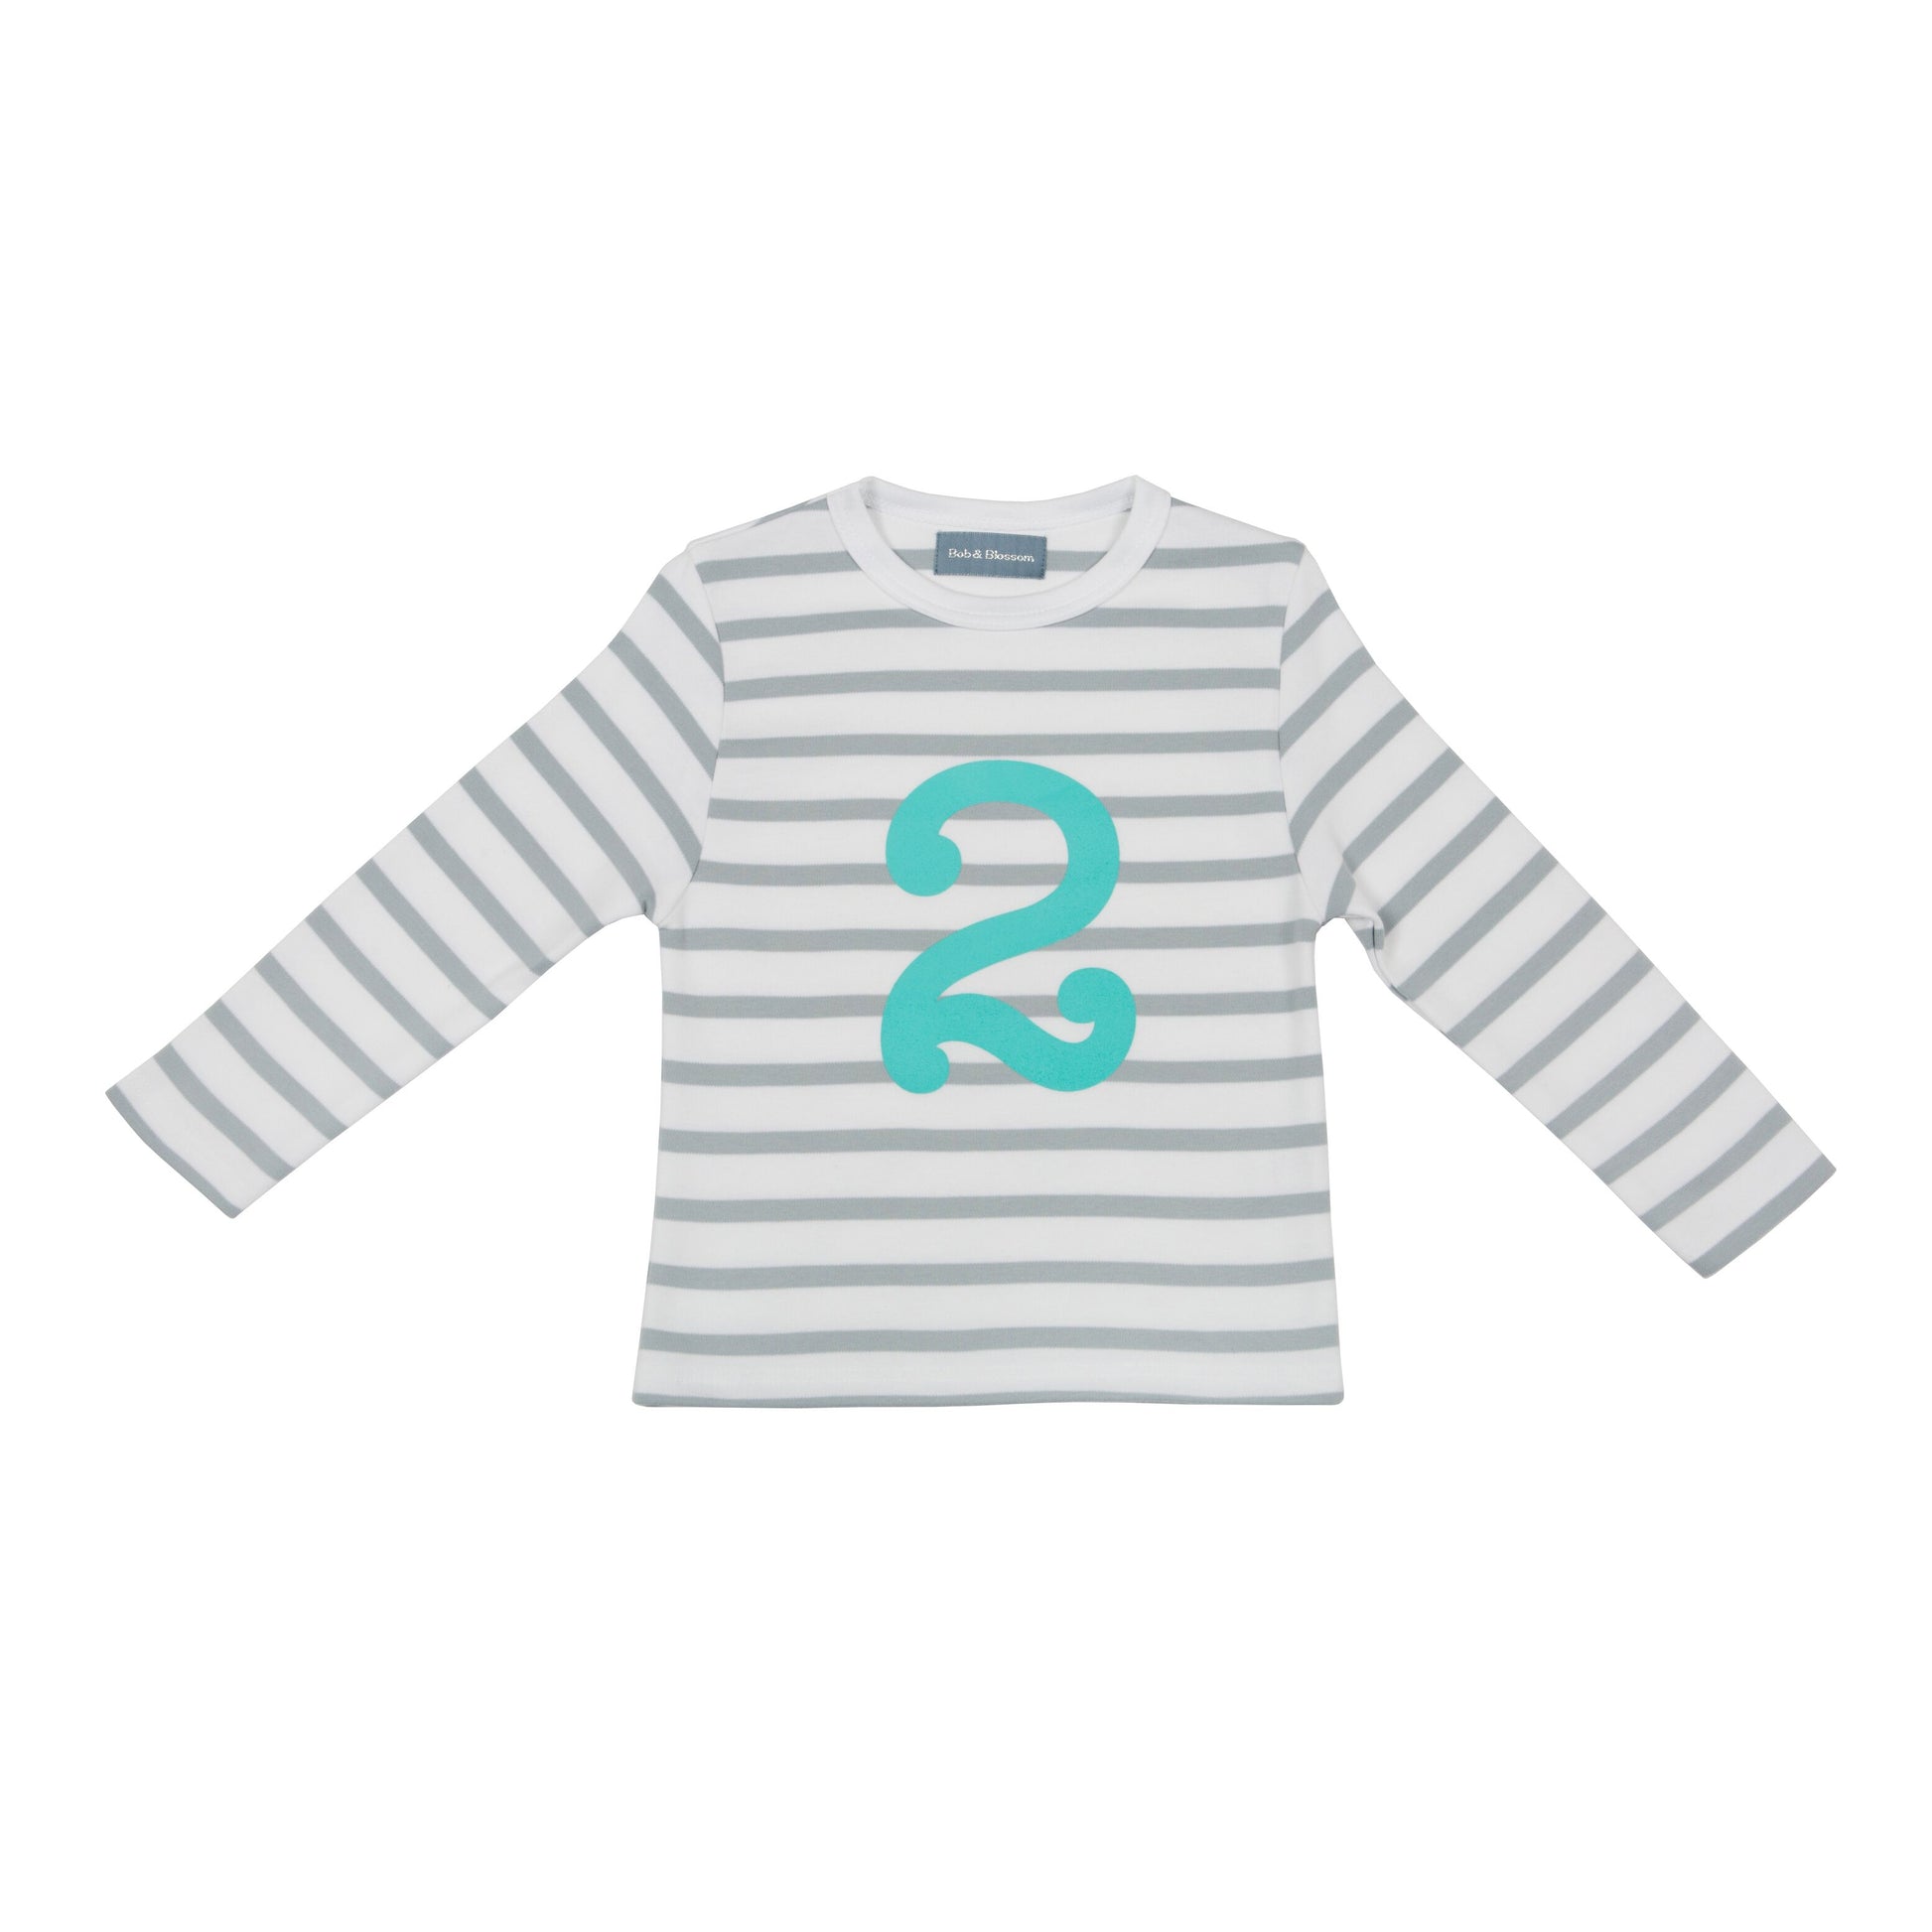 Bob & Blossom grey and white striped long sleeved t shirt with turquoise number 2